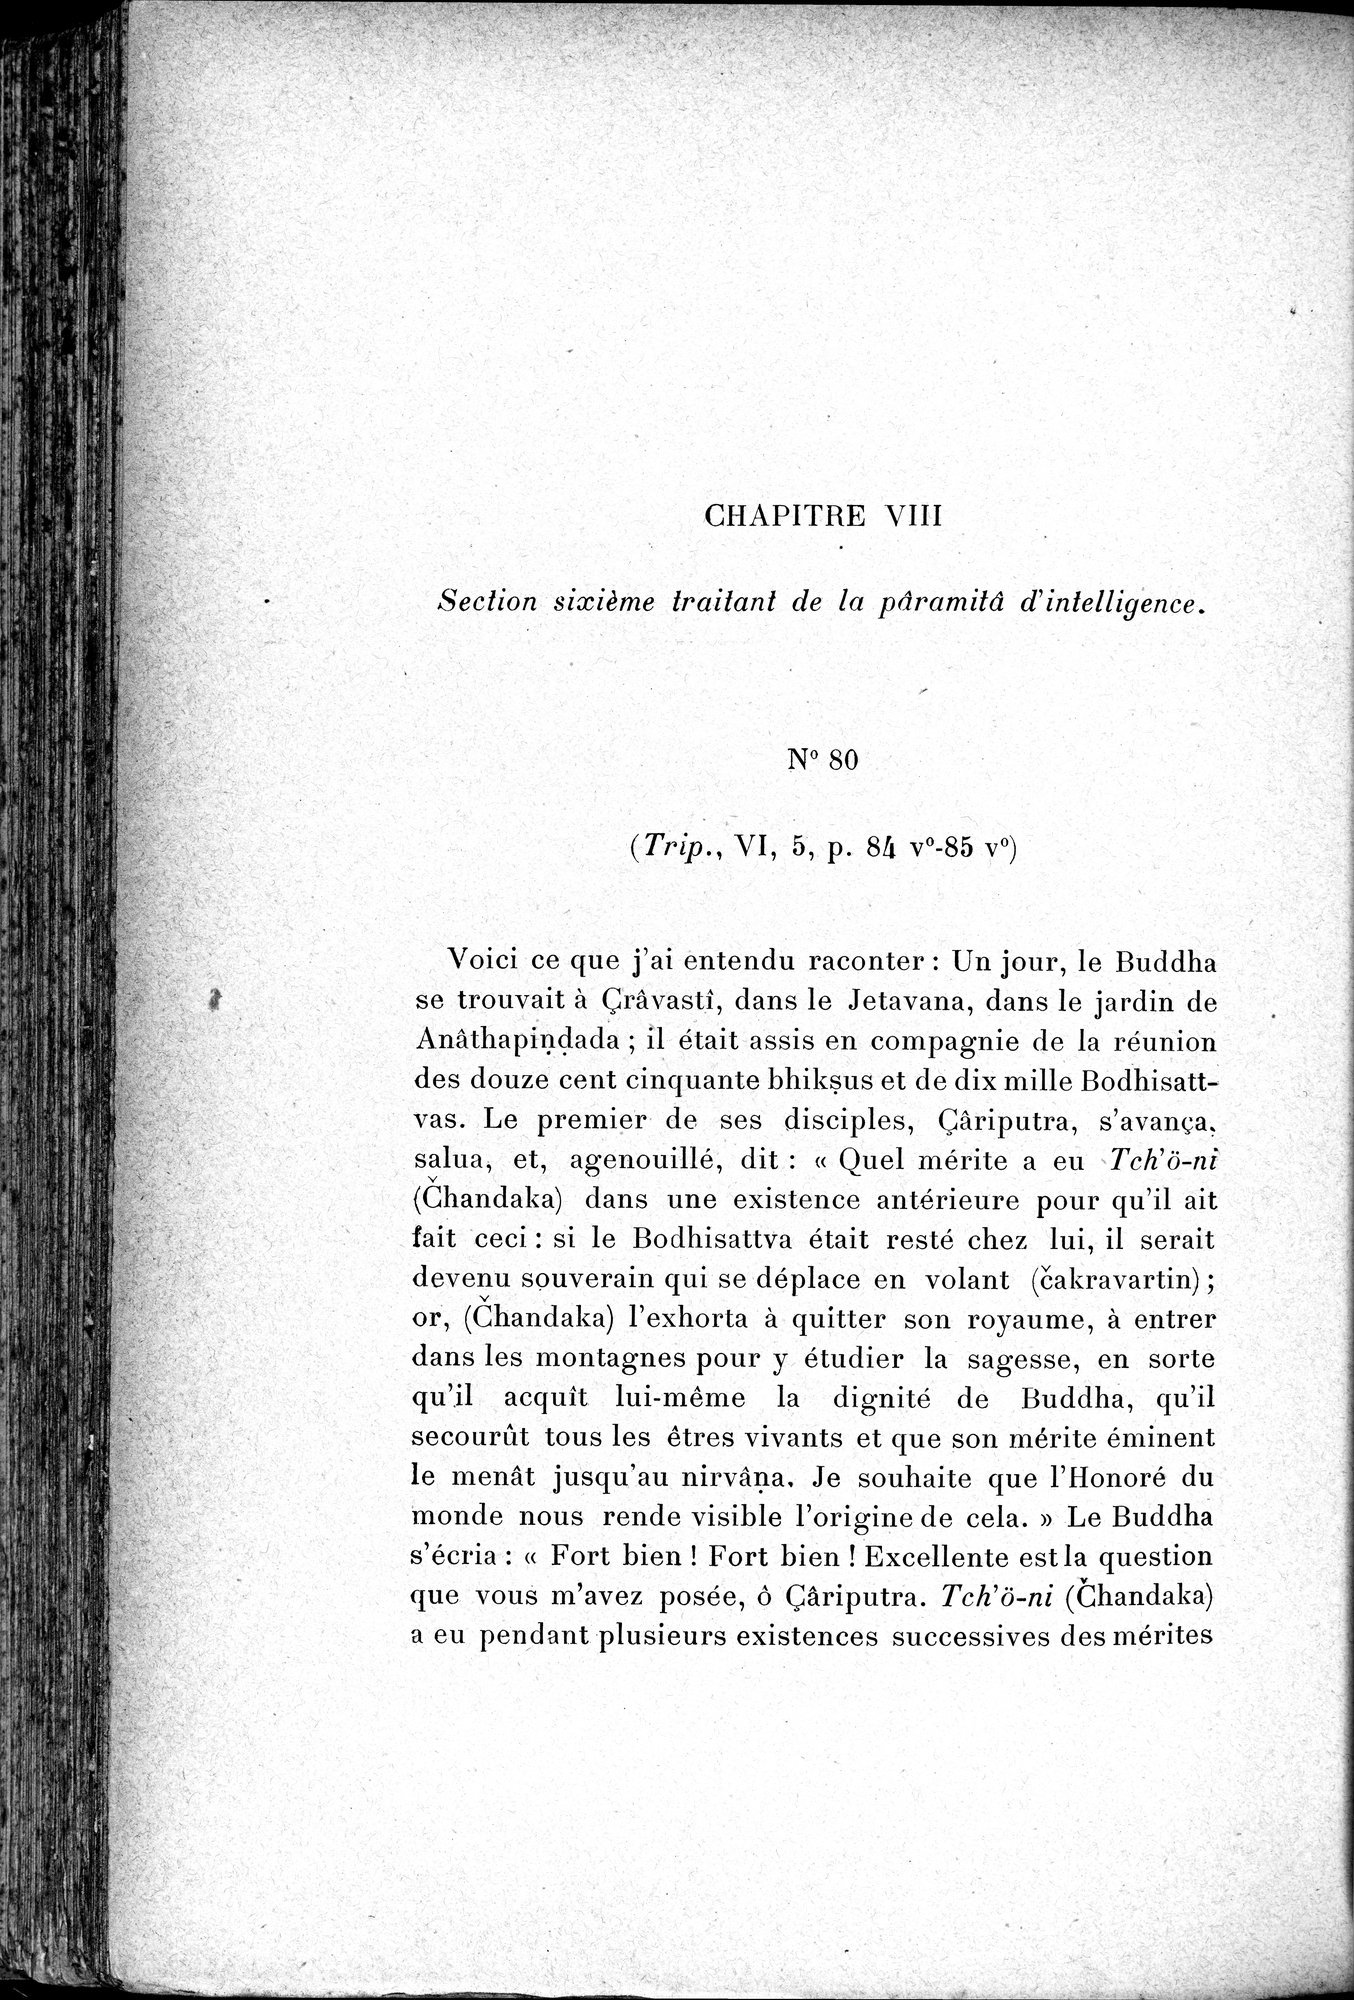 Cinq Cents Contes et Apologues : vol.1 / Page 326 (Grayscale High Resolution Image)